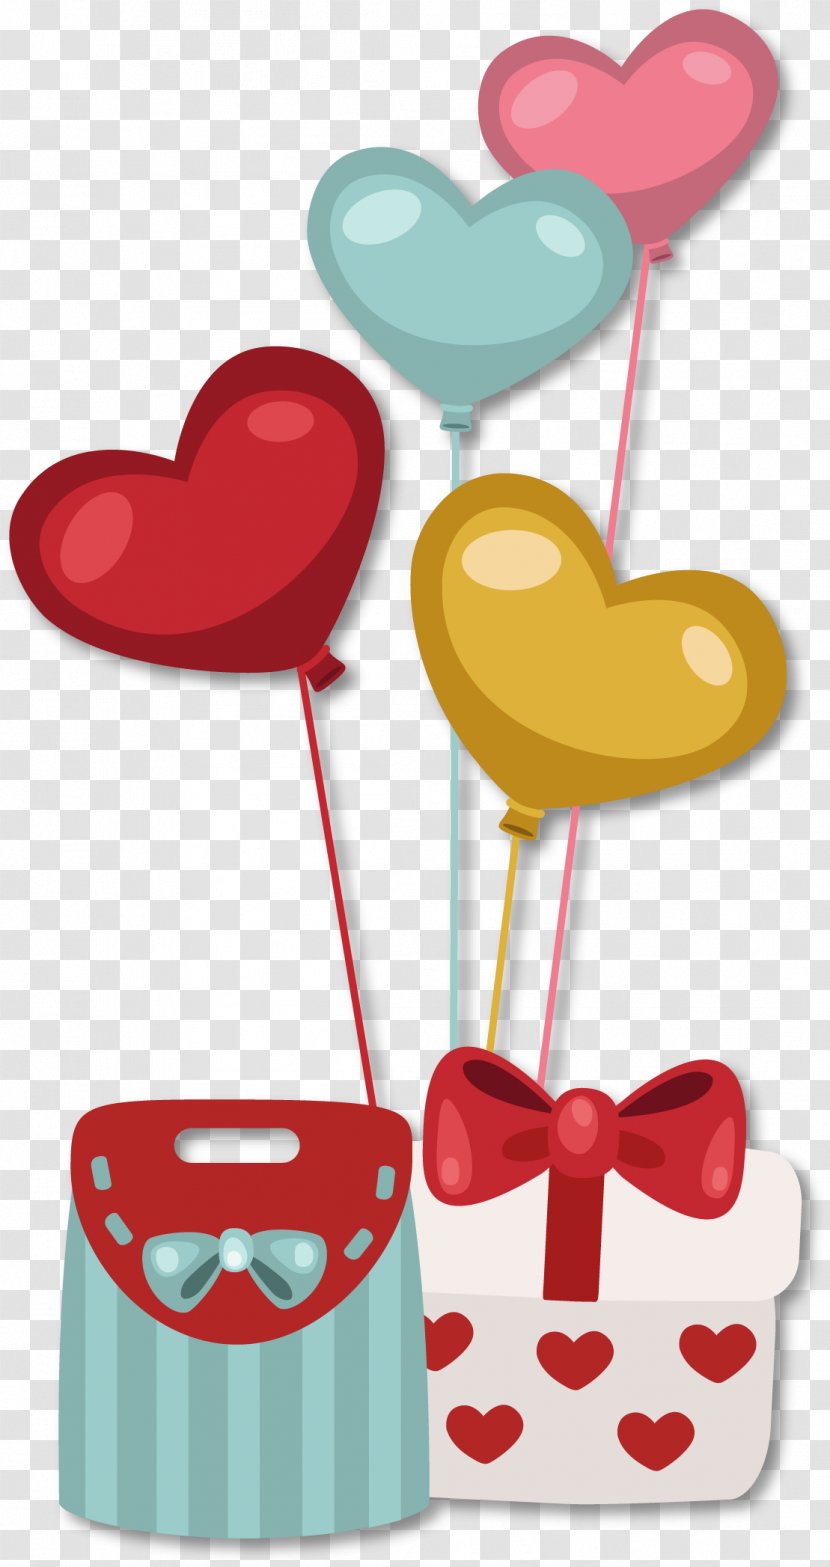 Valentines Day Gift Tanabata Heart - Couple - Decorative Elements Transparent PNG